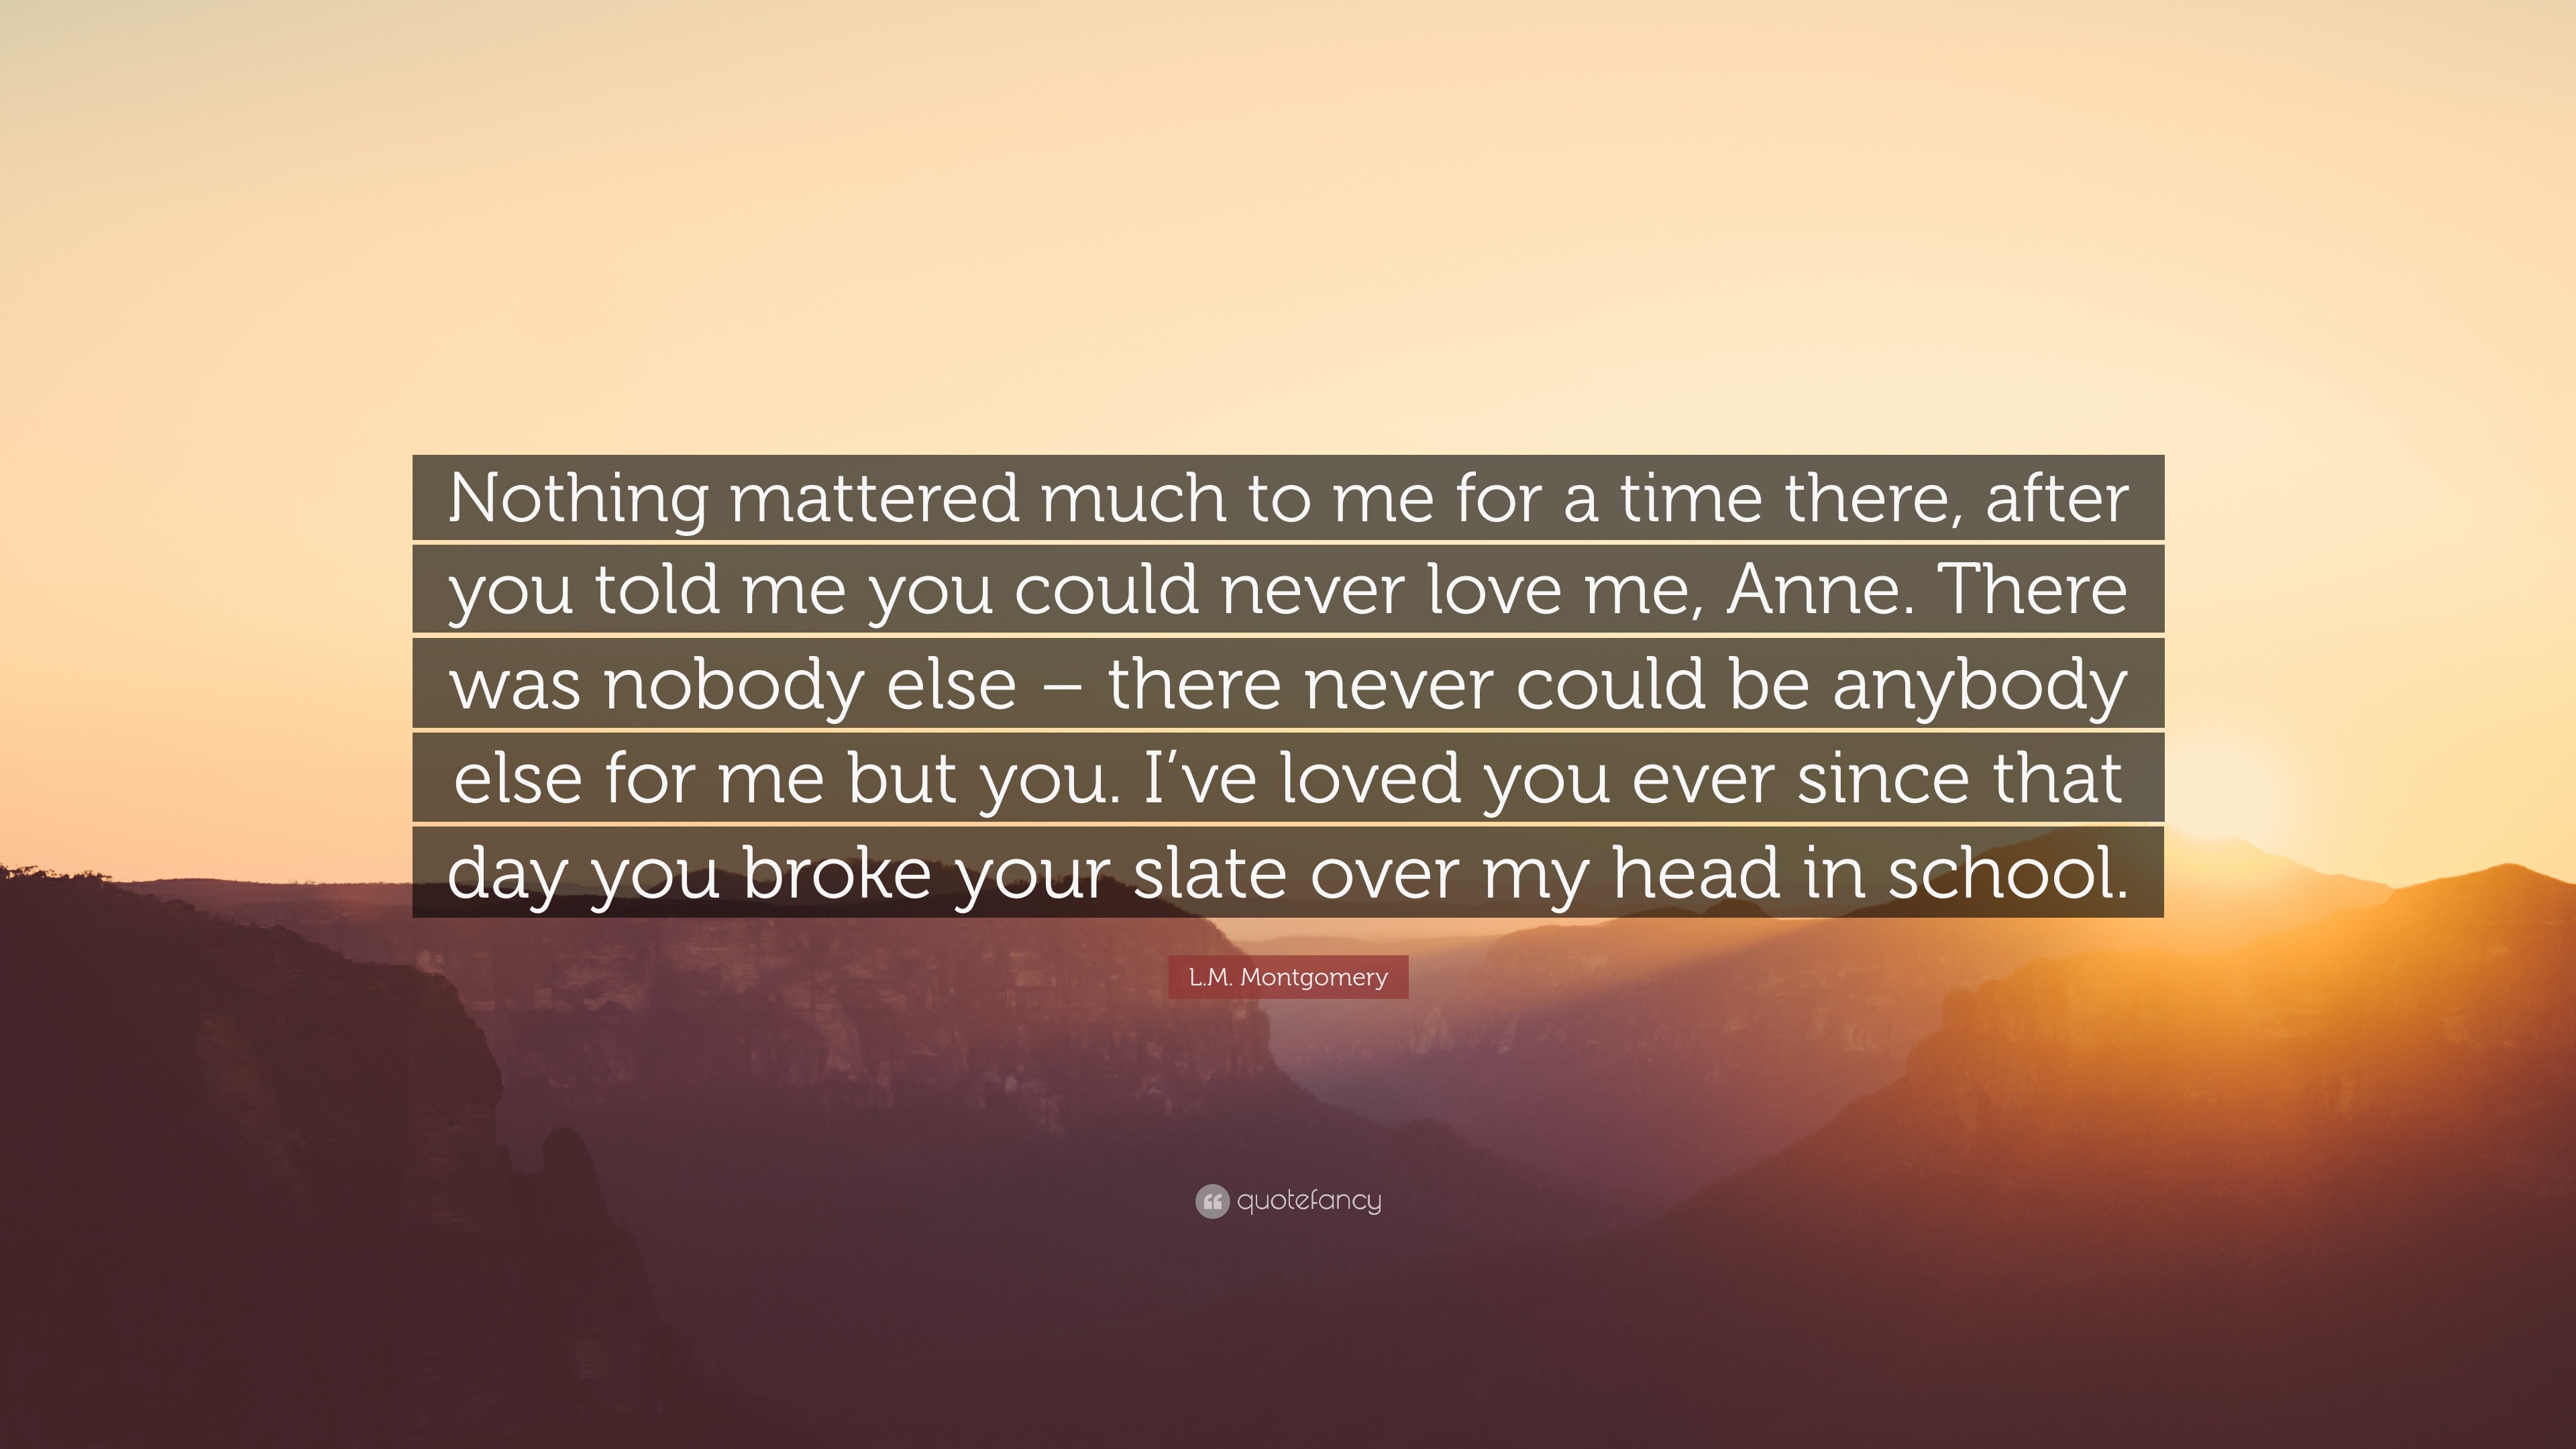 L M Montgomery Quote “Nothing mattered much to me for a time there after